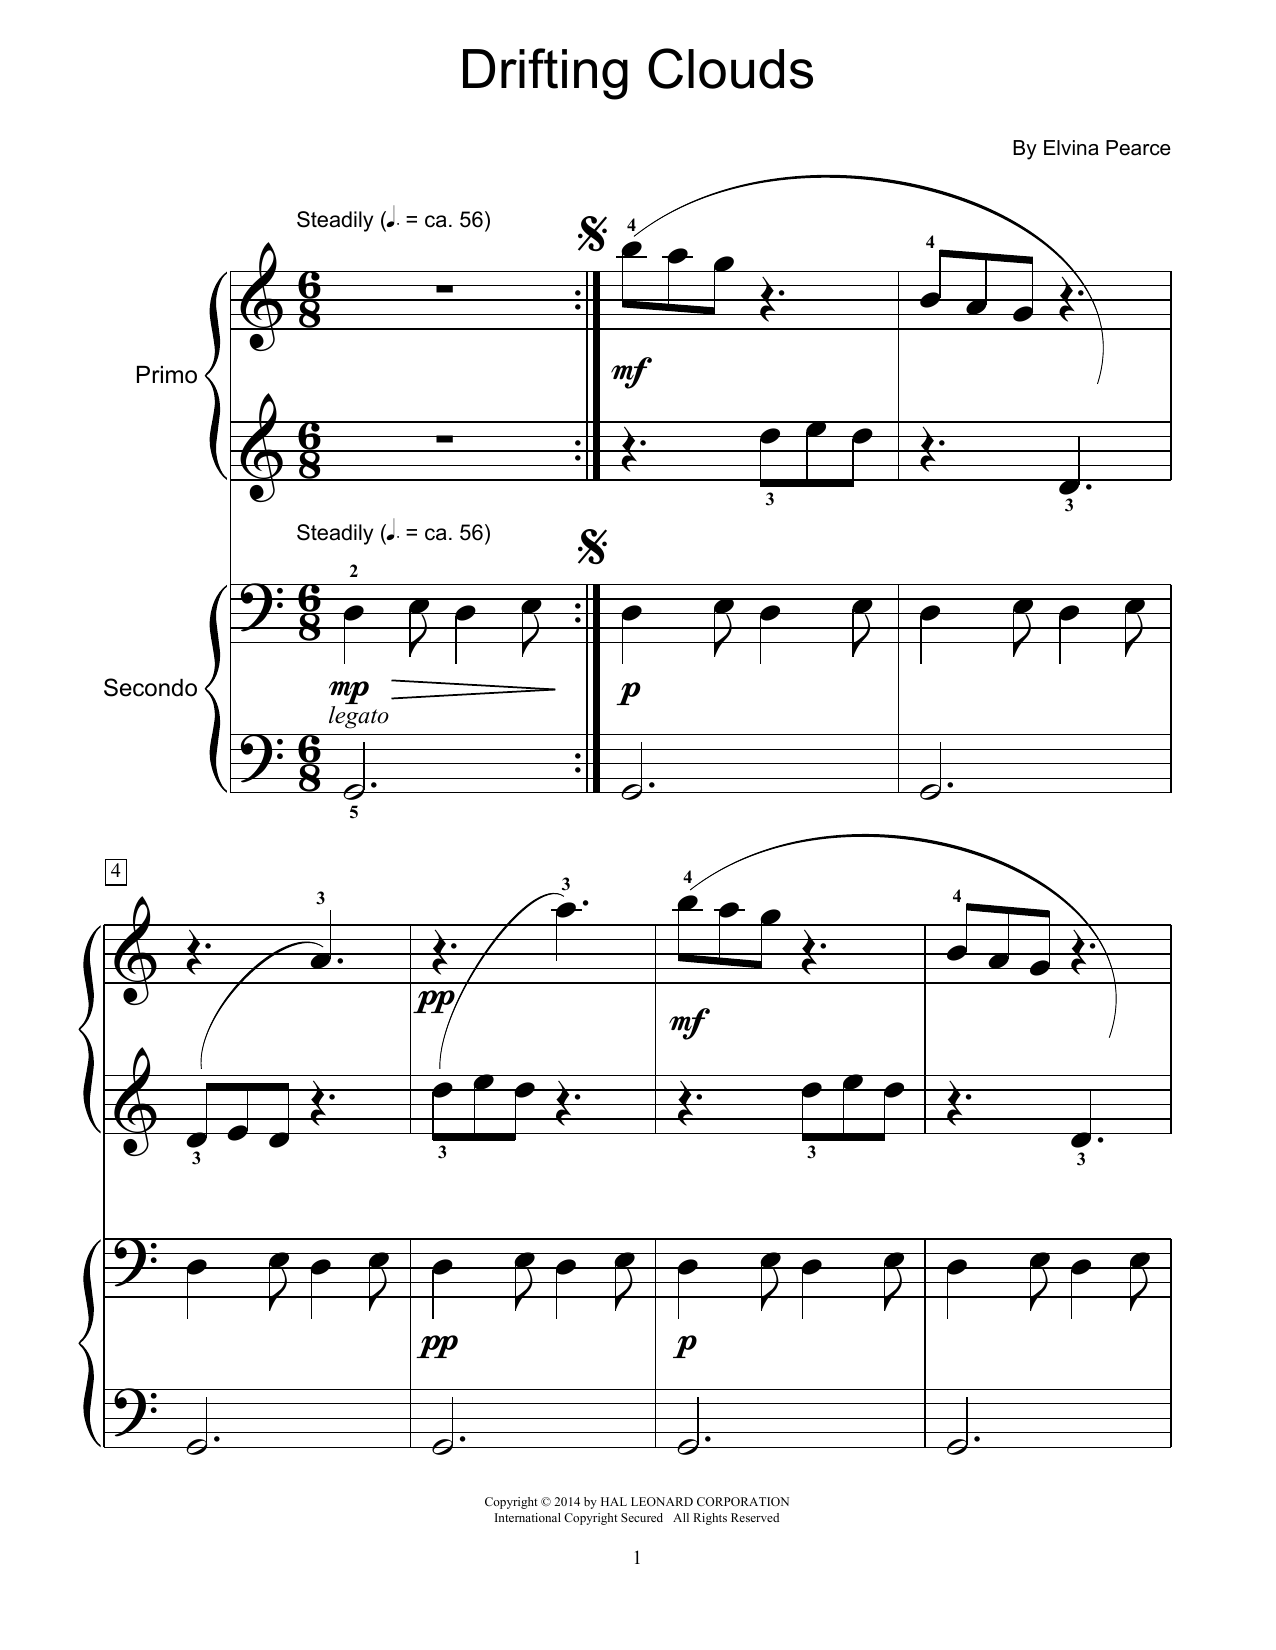 Elvina Pearce Drifting Clouds sheet music notes and chords. Download Printable PDF.